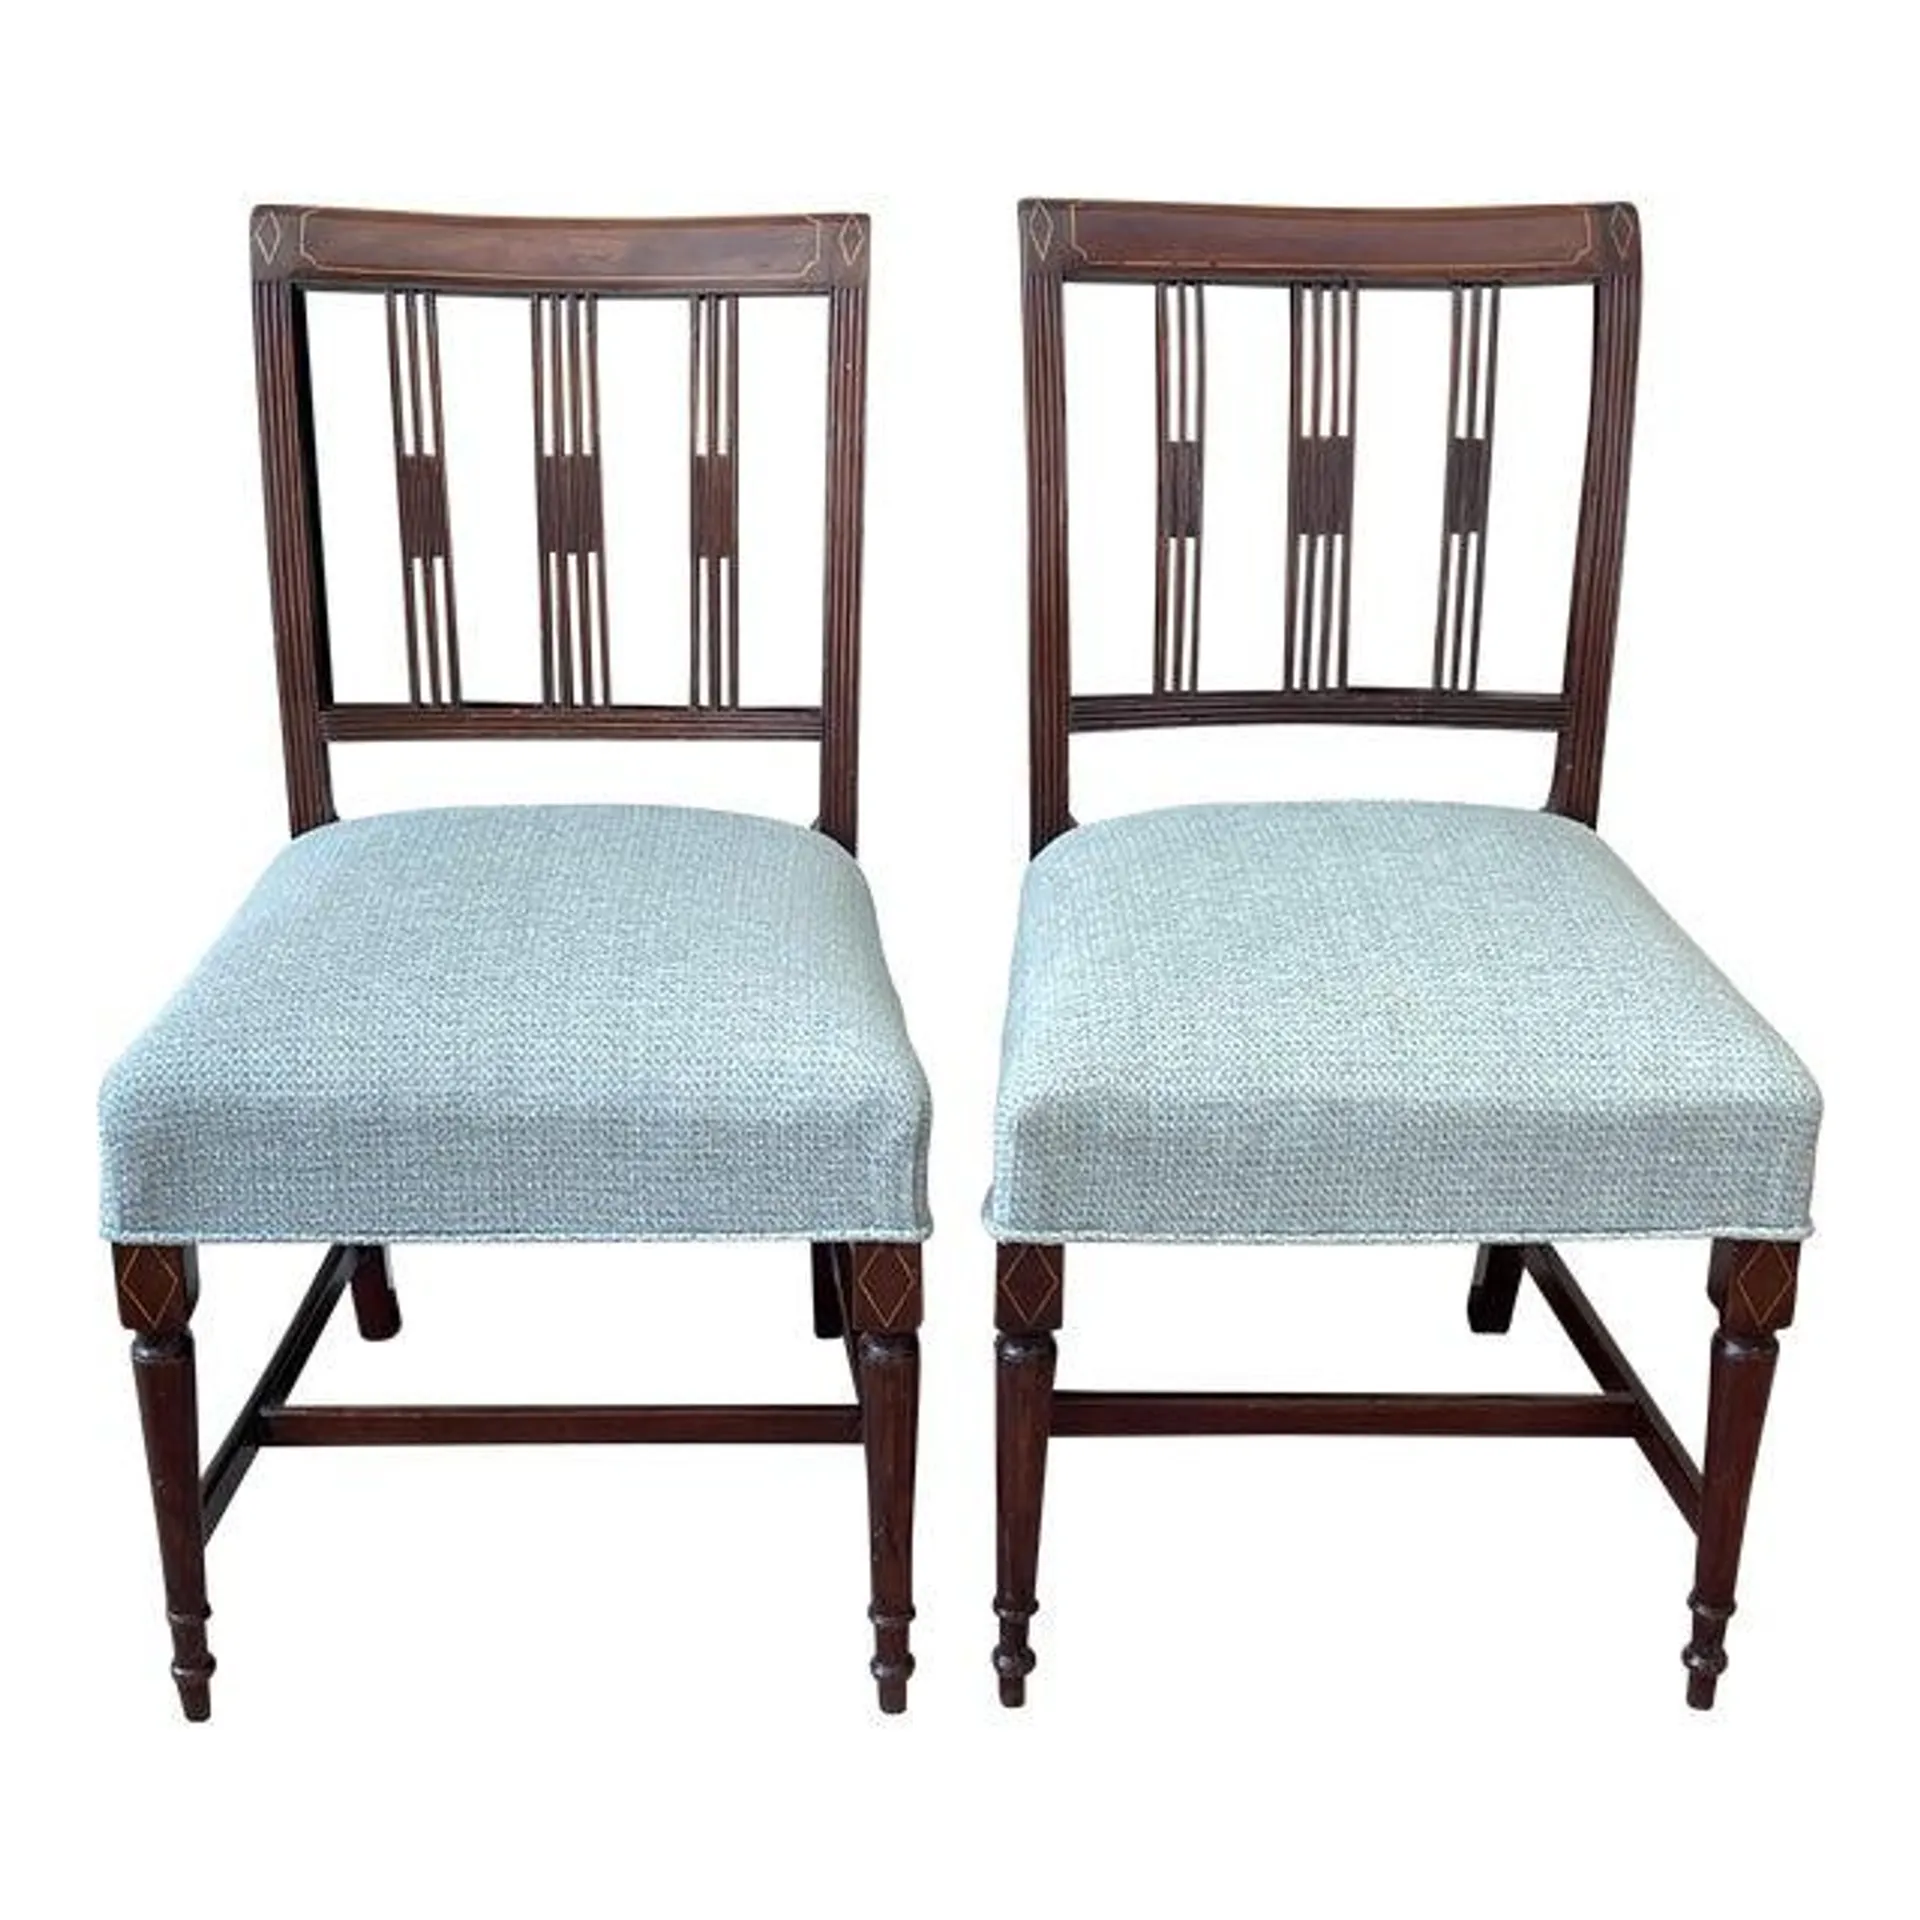 Pair of Antique Regency Style Chairs With Inlay